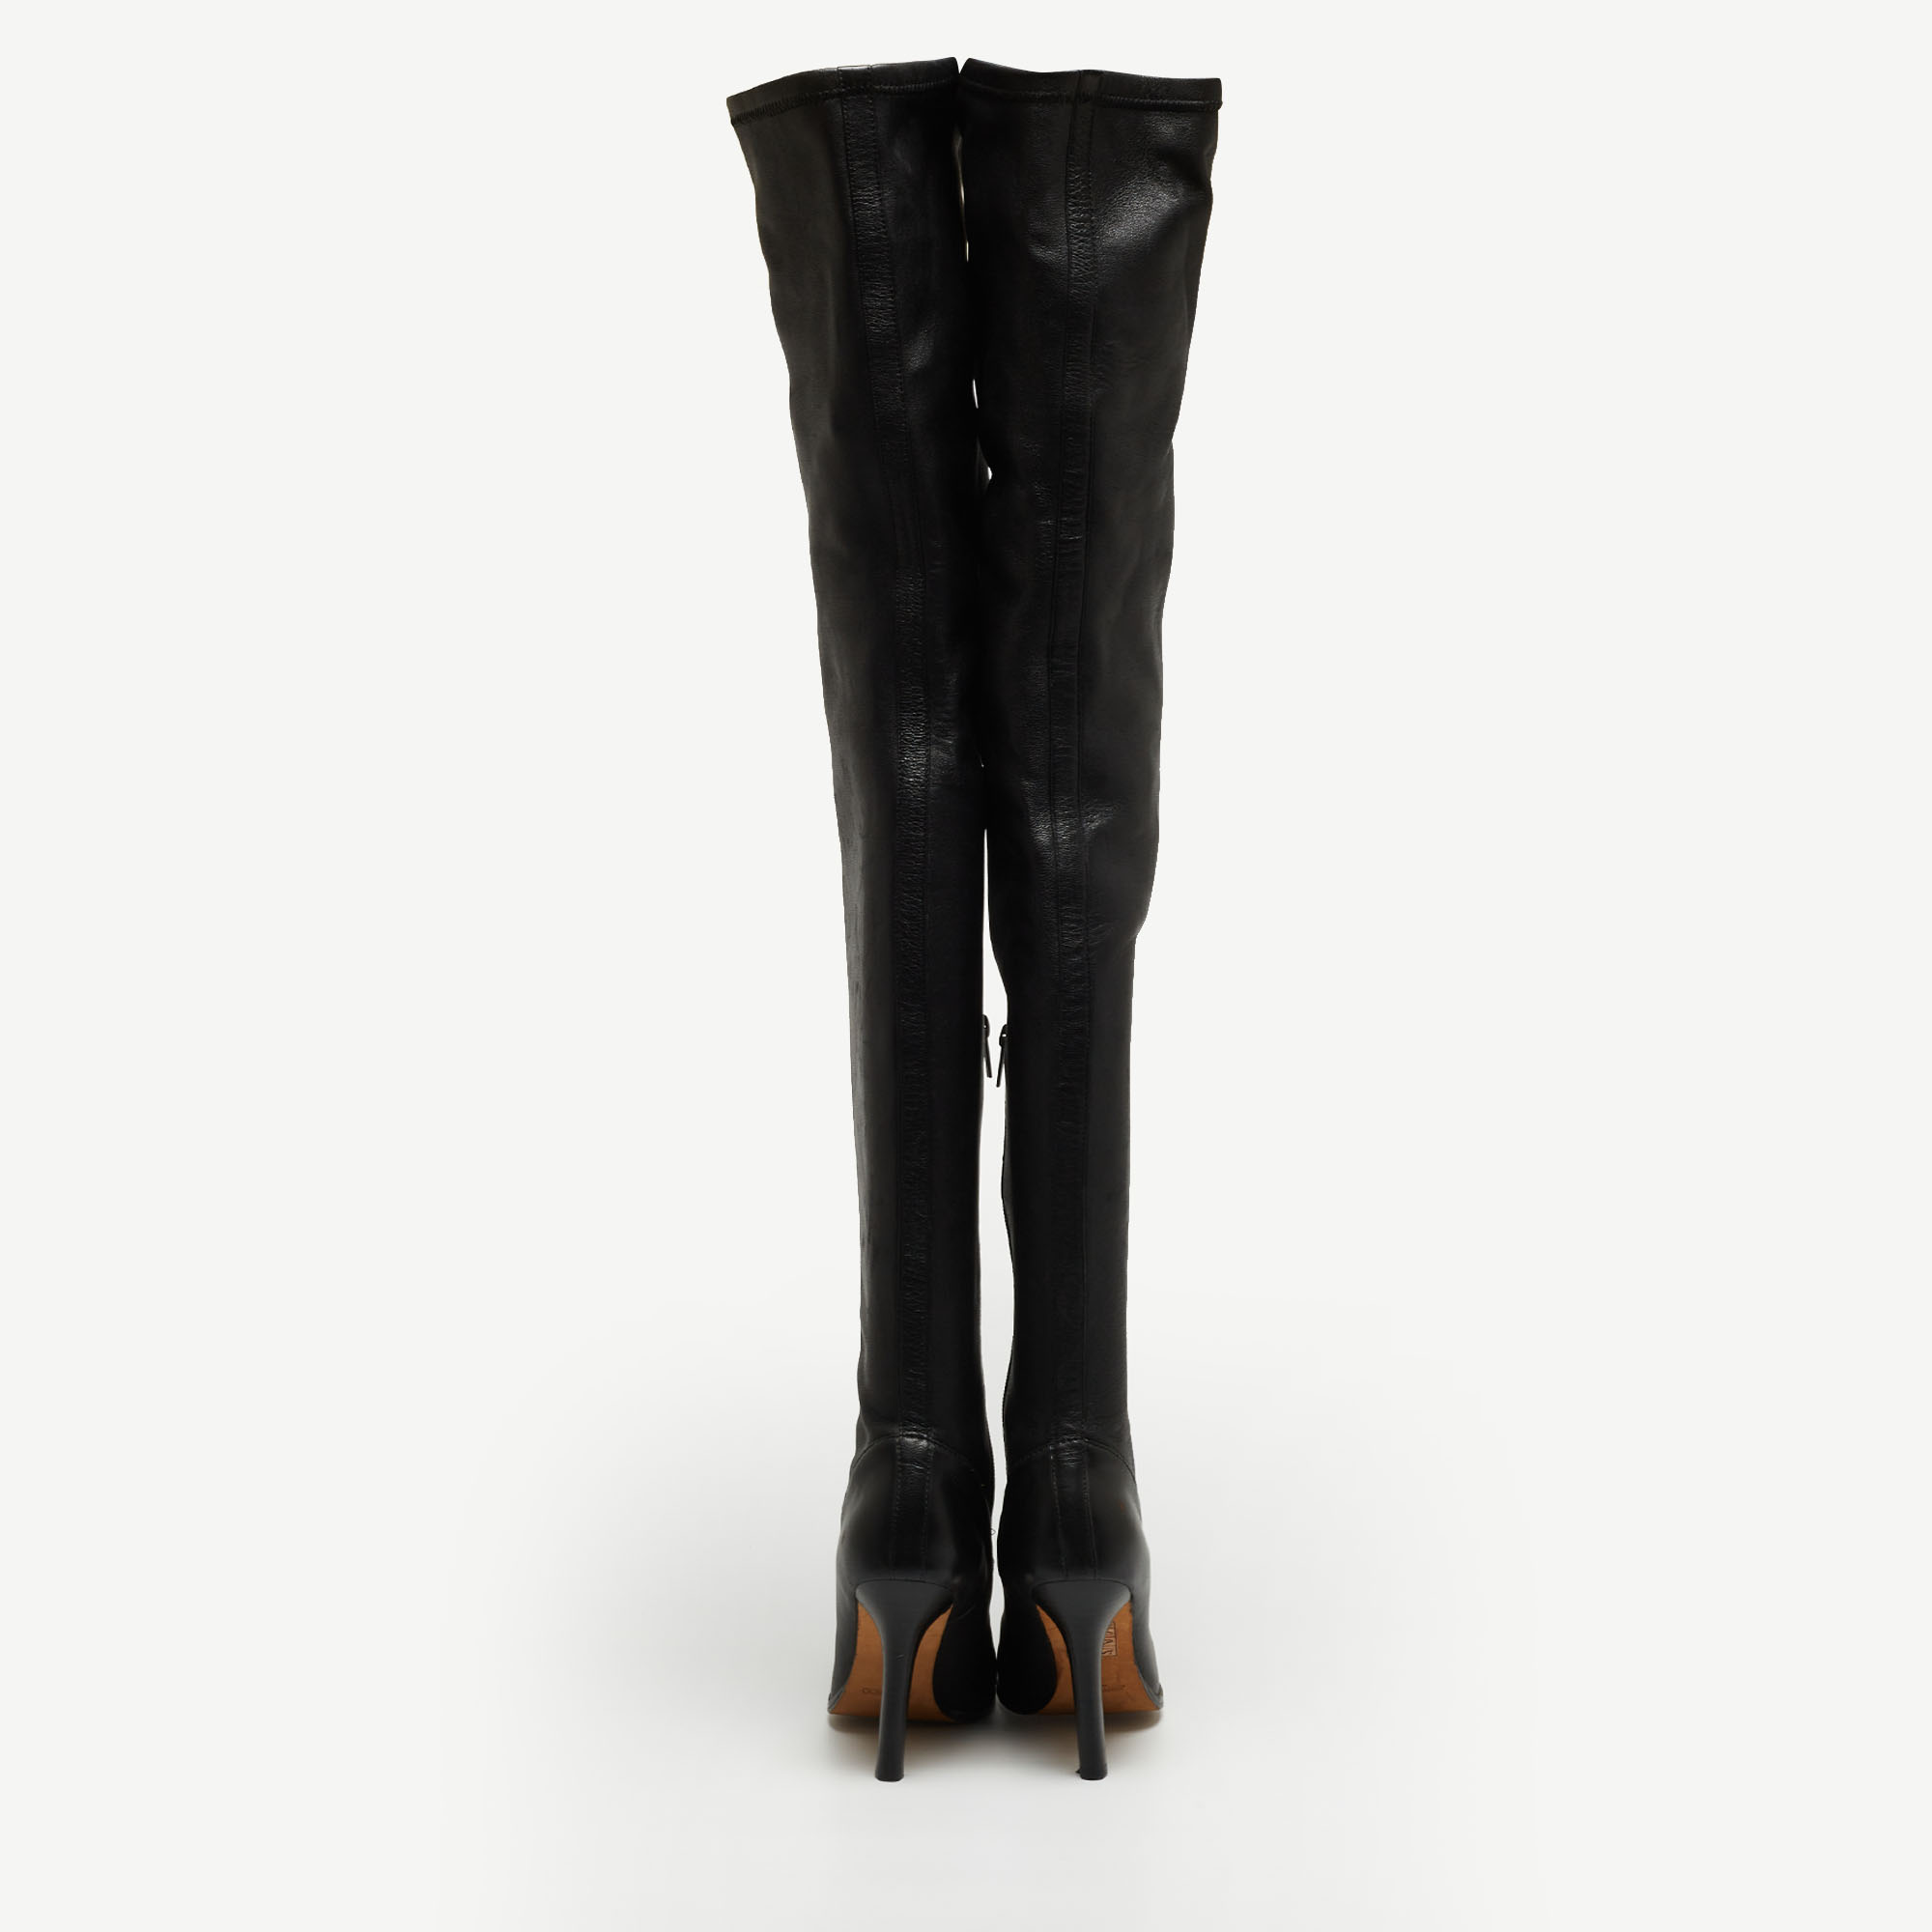 Jimmy Choo For H&M Black Leather Thigh High Boots Size 37